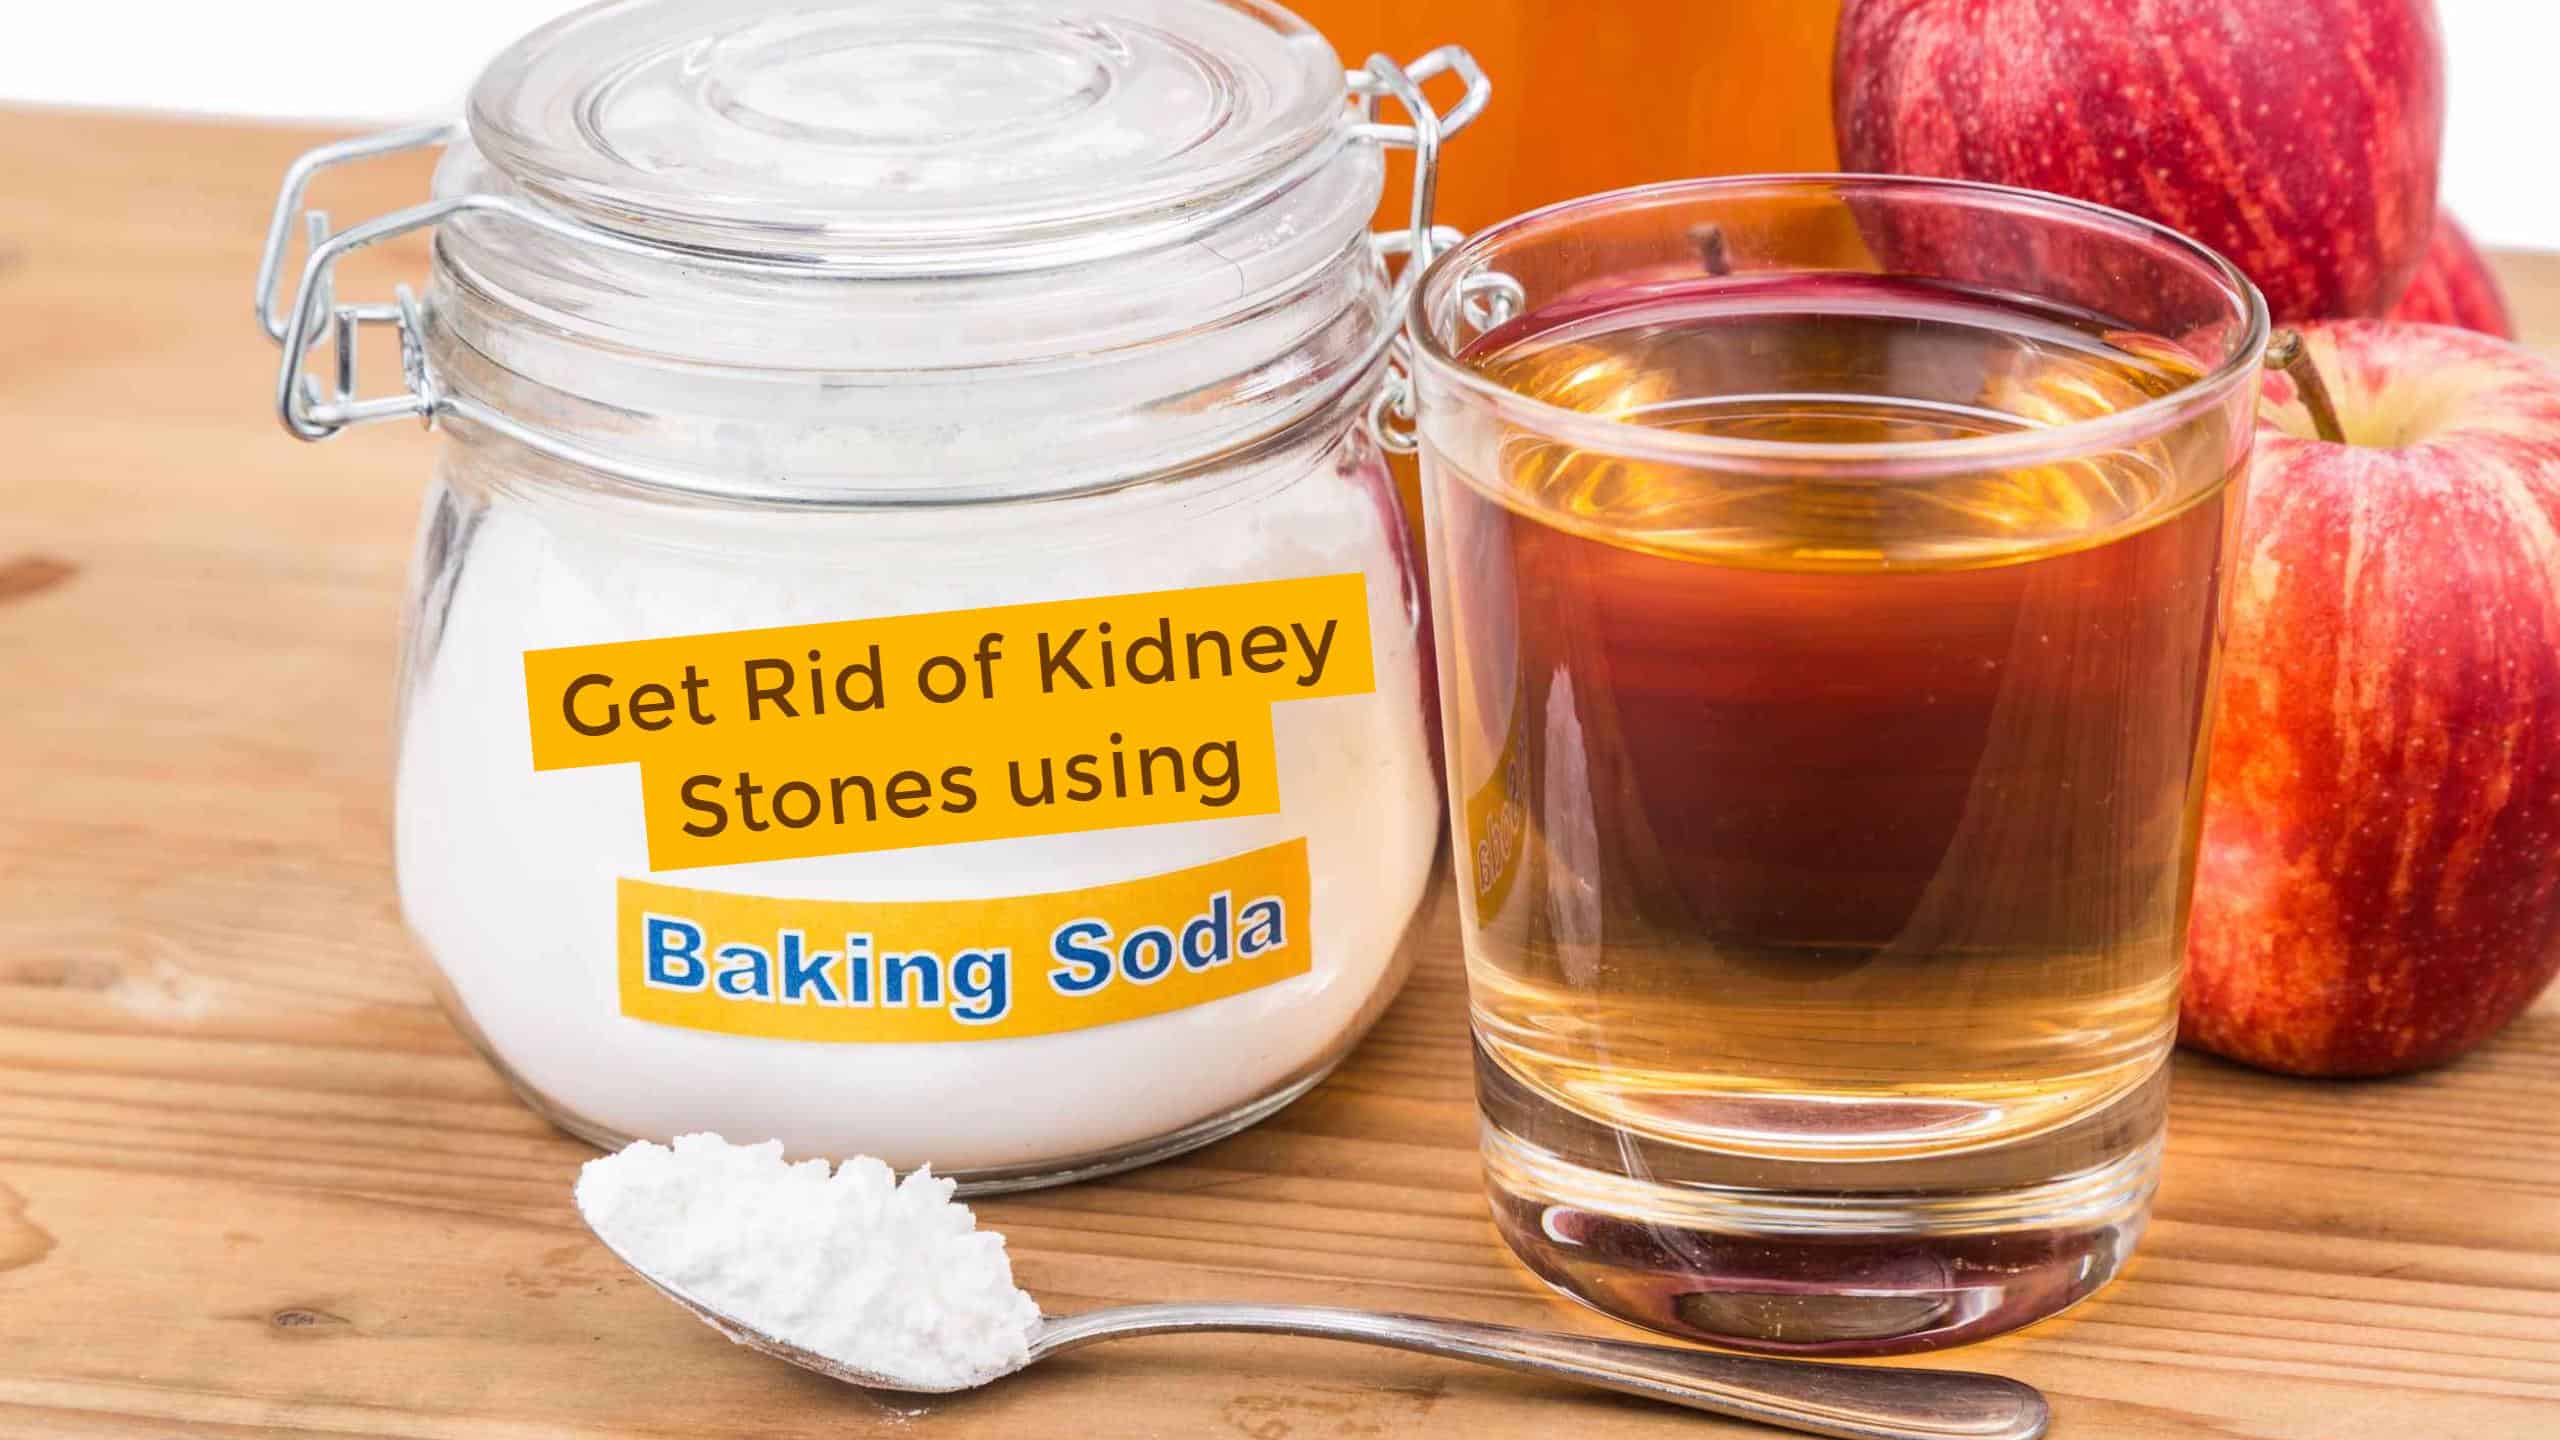 How to Get Rid of Kidney Stones using Baking Soda